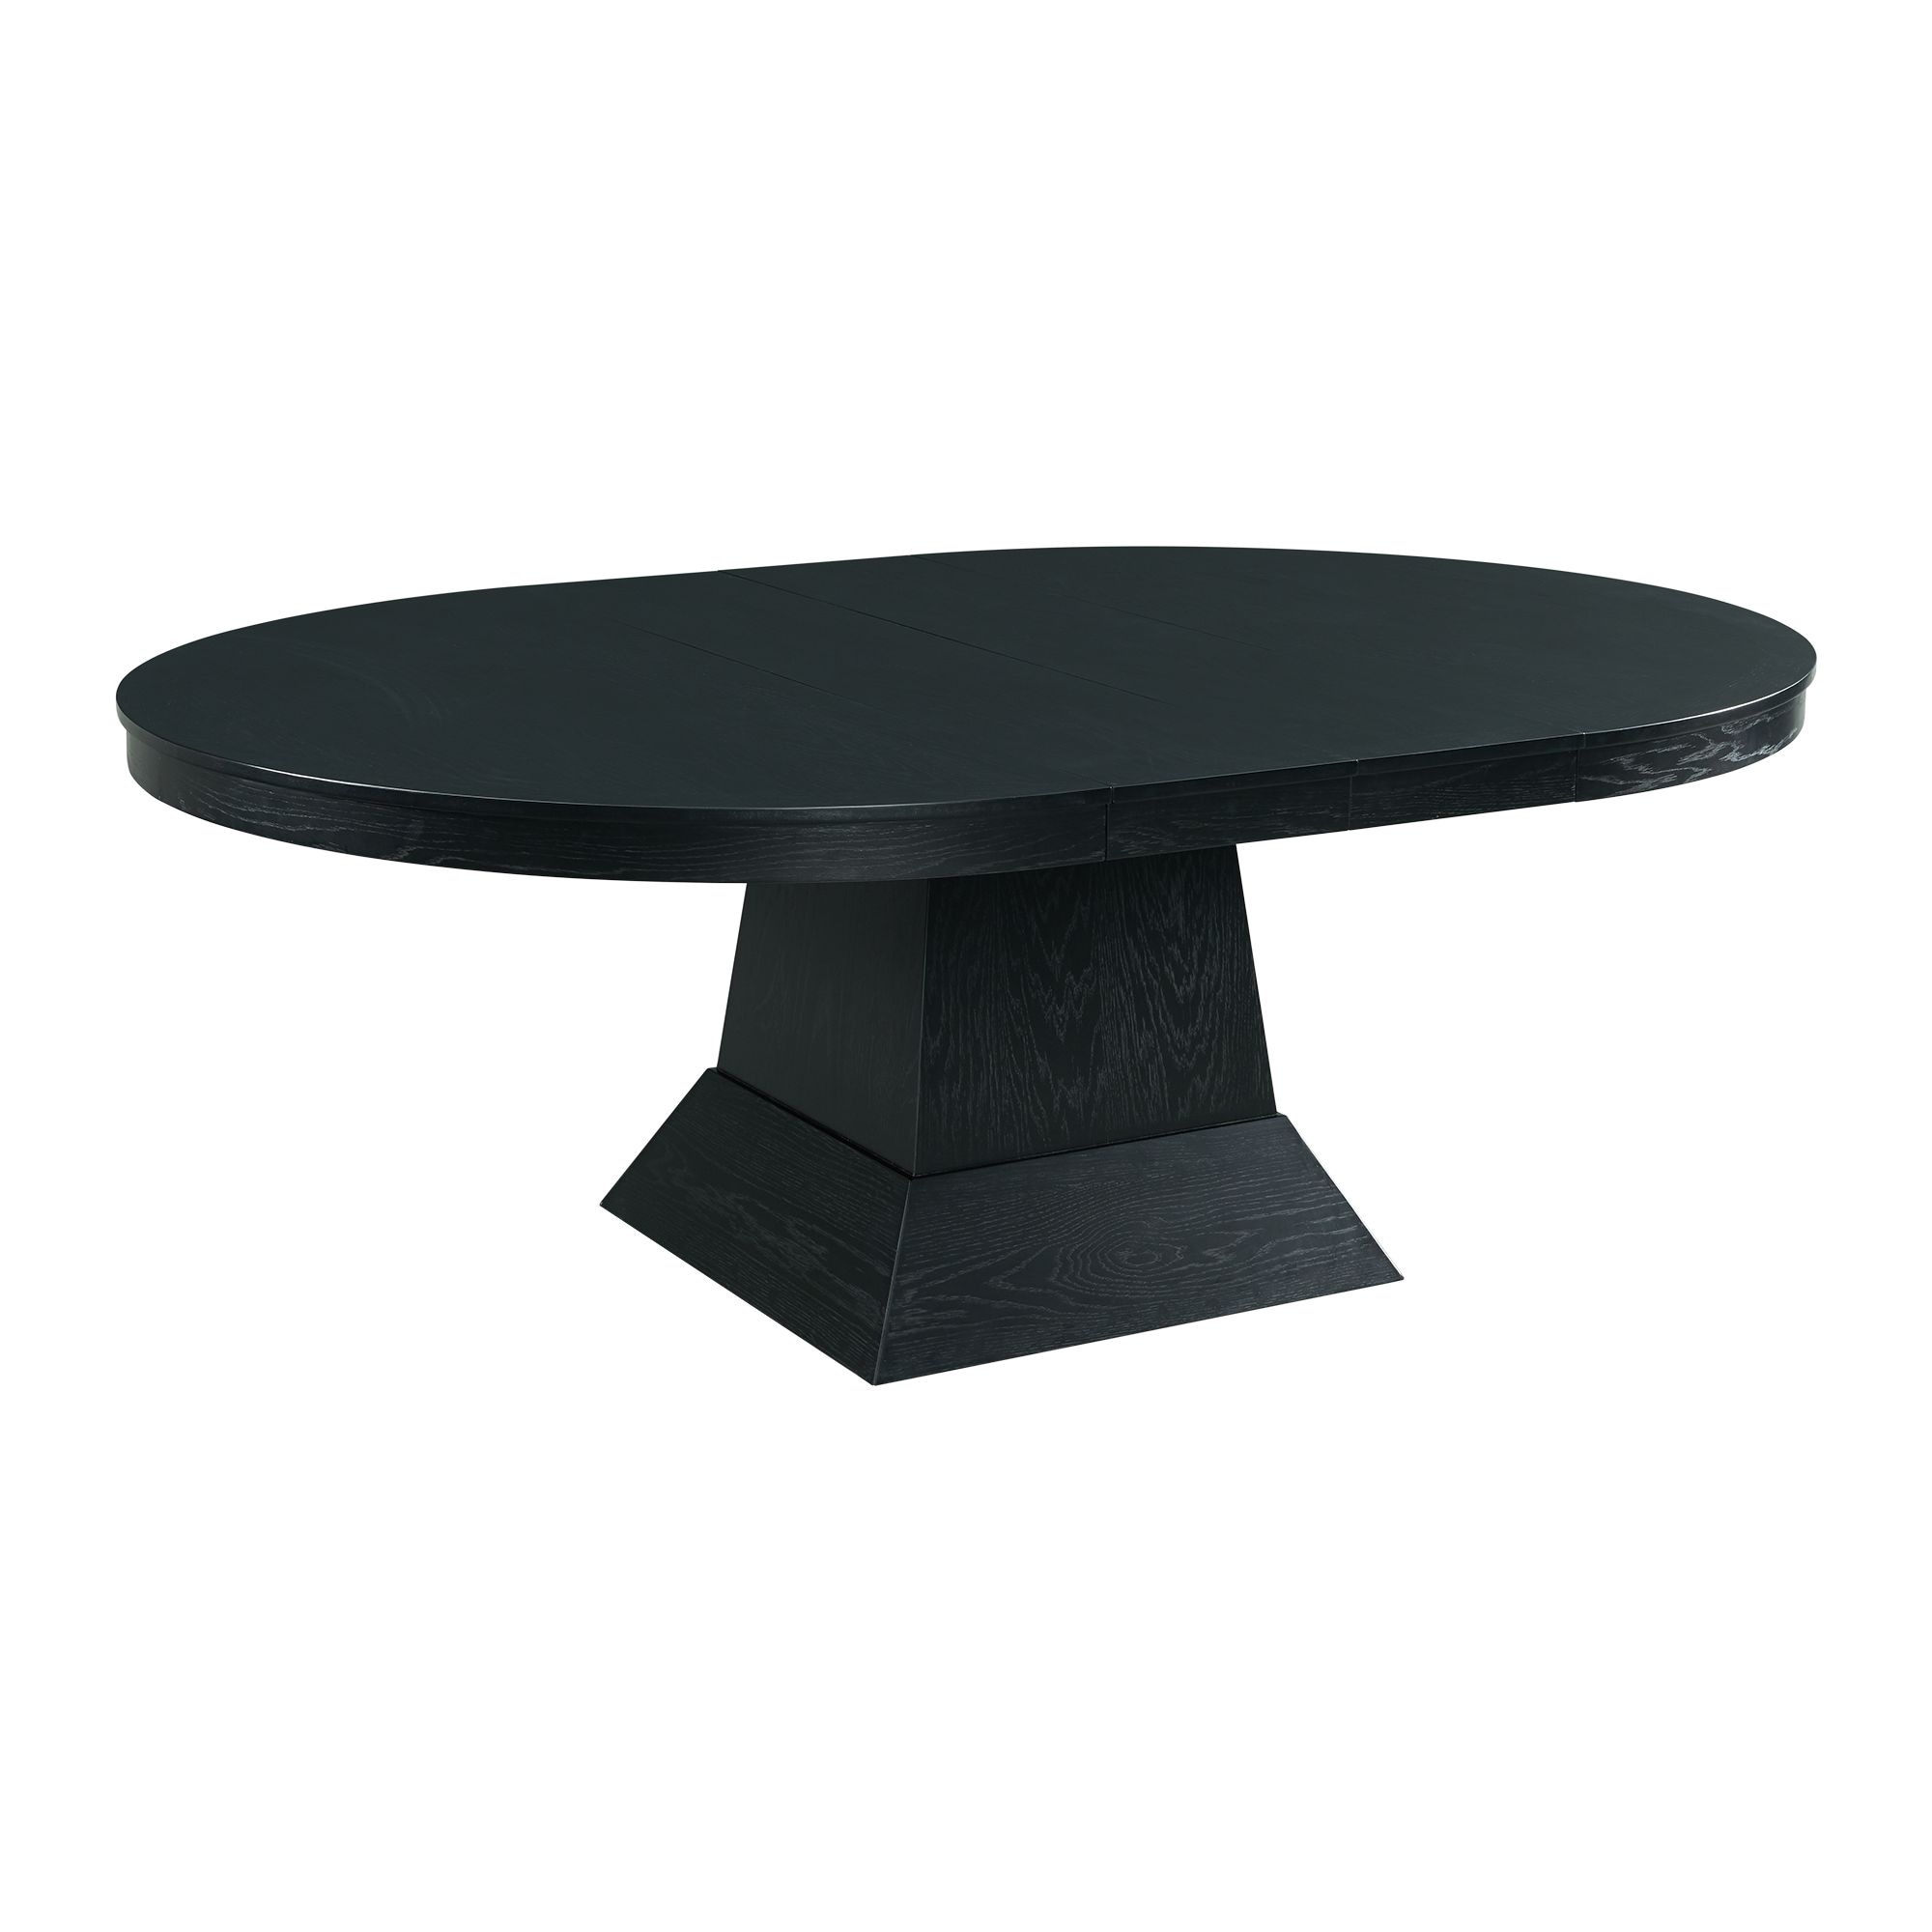 Picket House Furnishings Mara Oval Dining Table